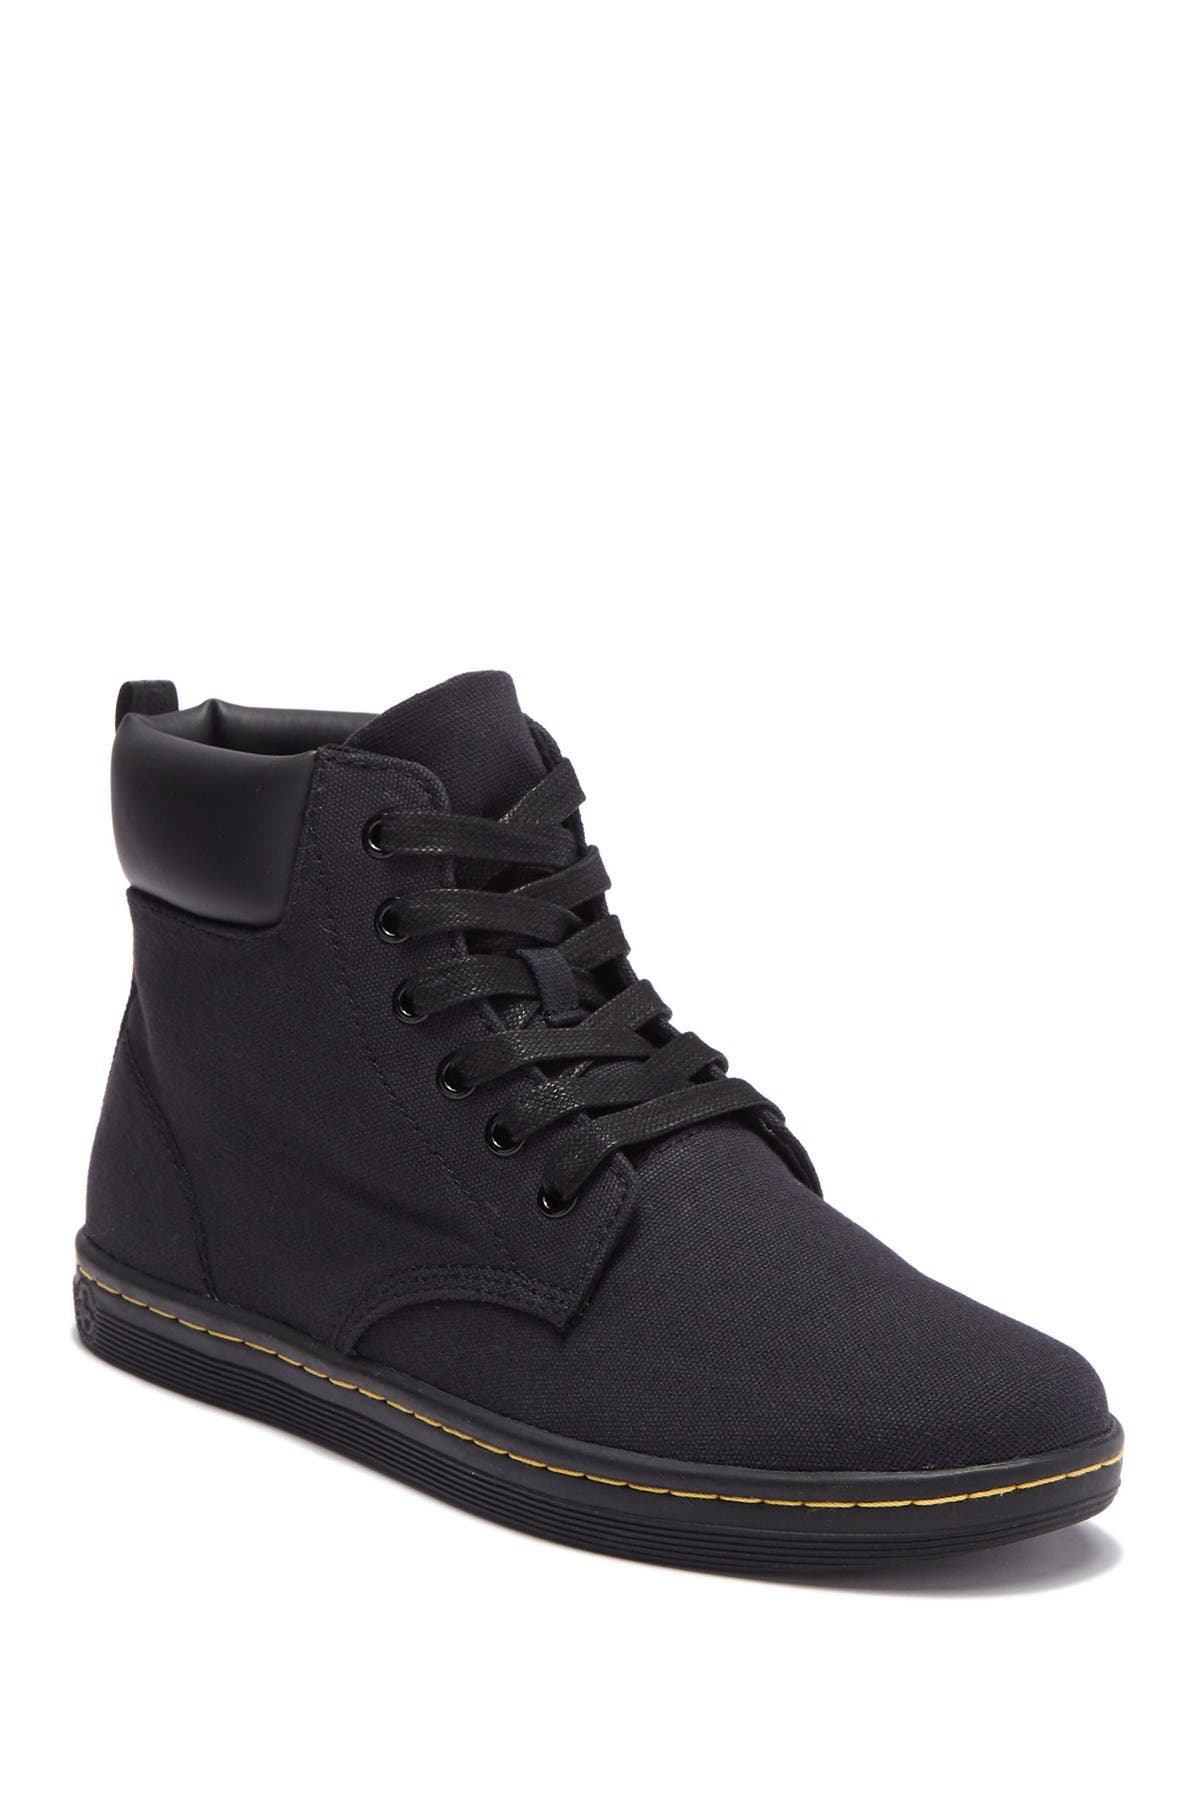 dr martens maelly canvas